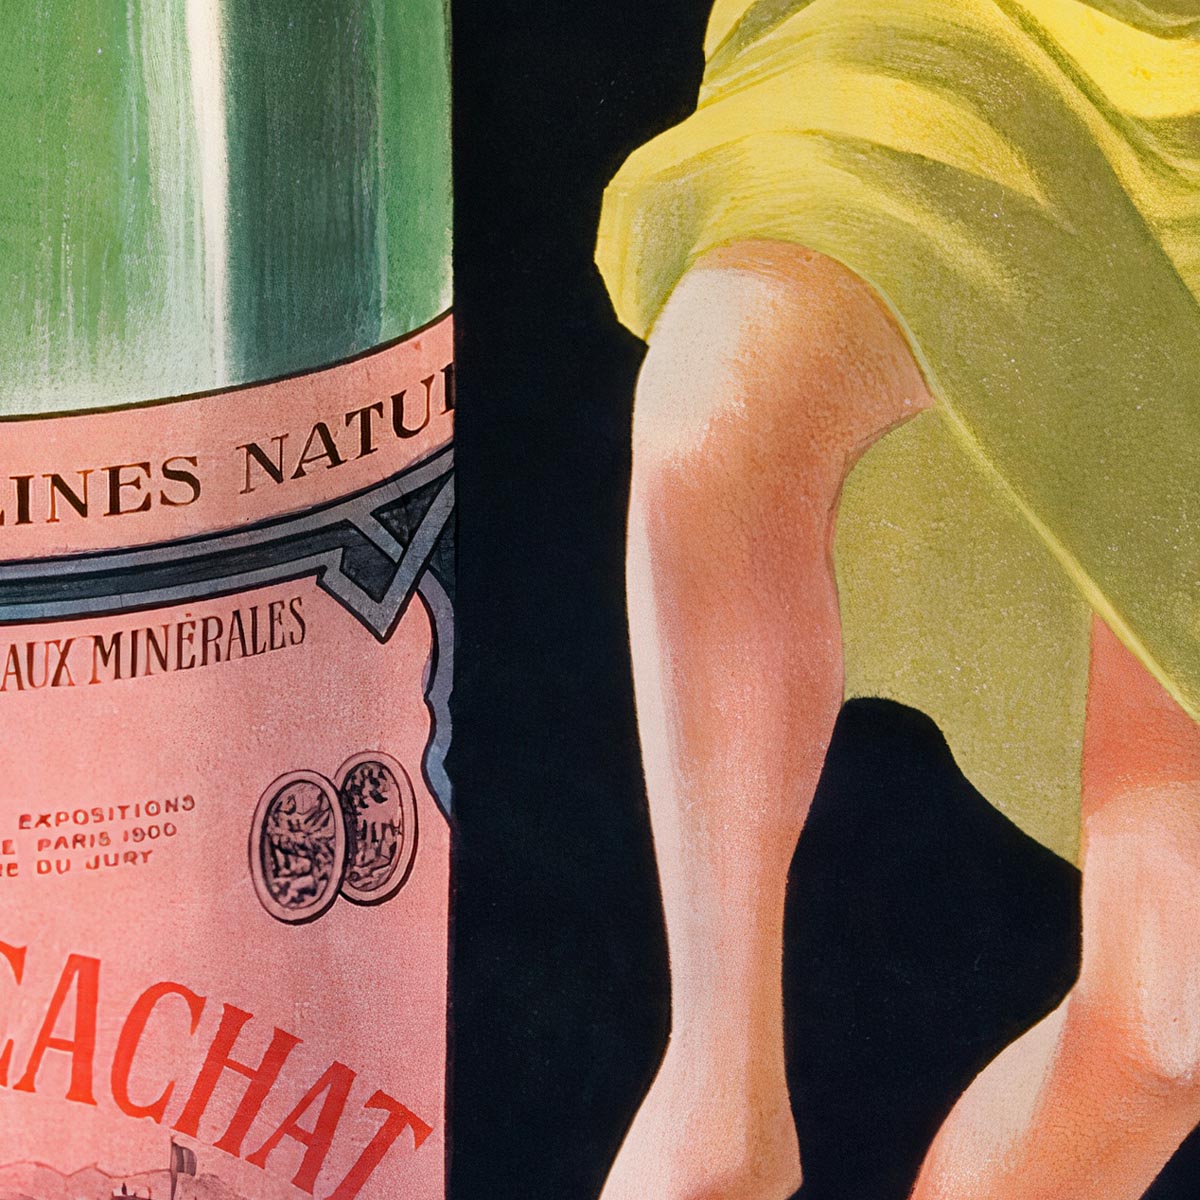 Drink all Evian-Cachat Art Print by Leonetto Cappiello